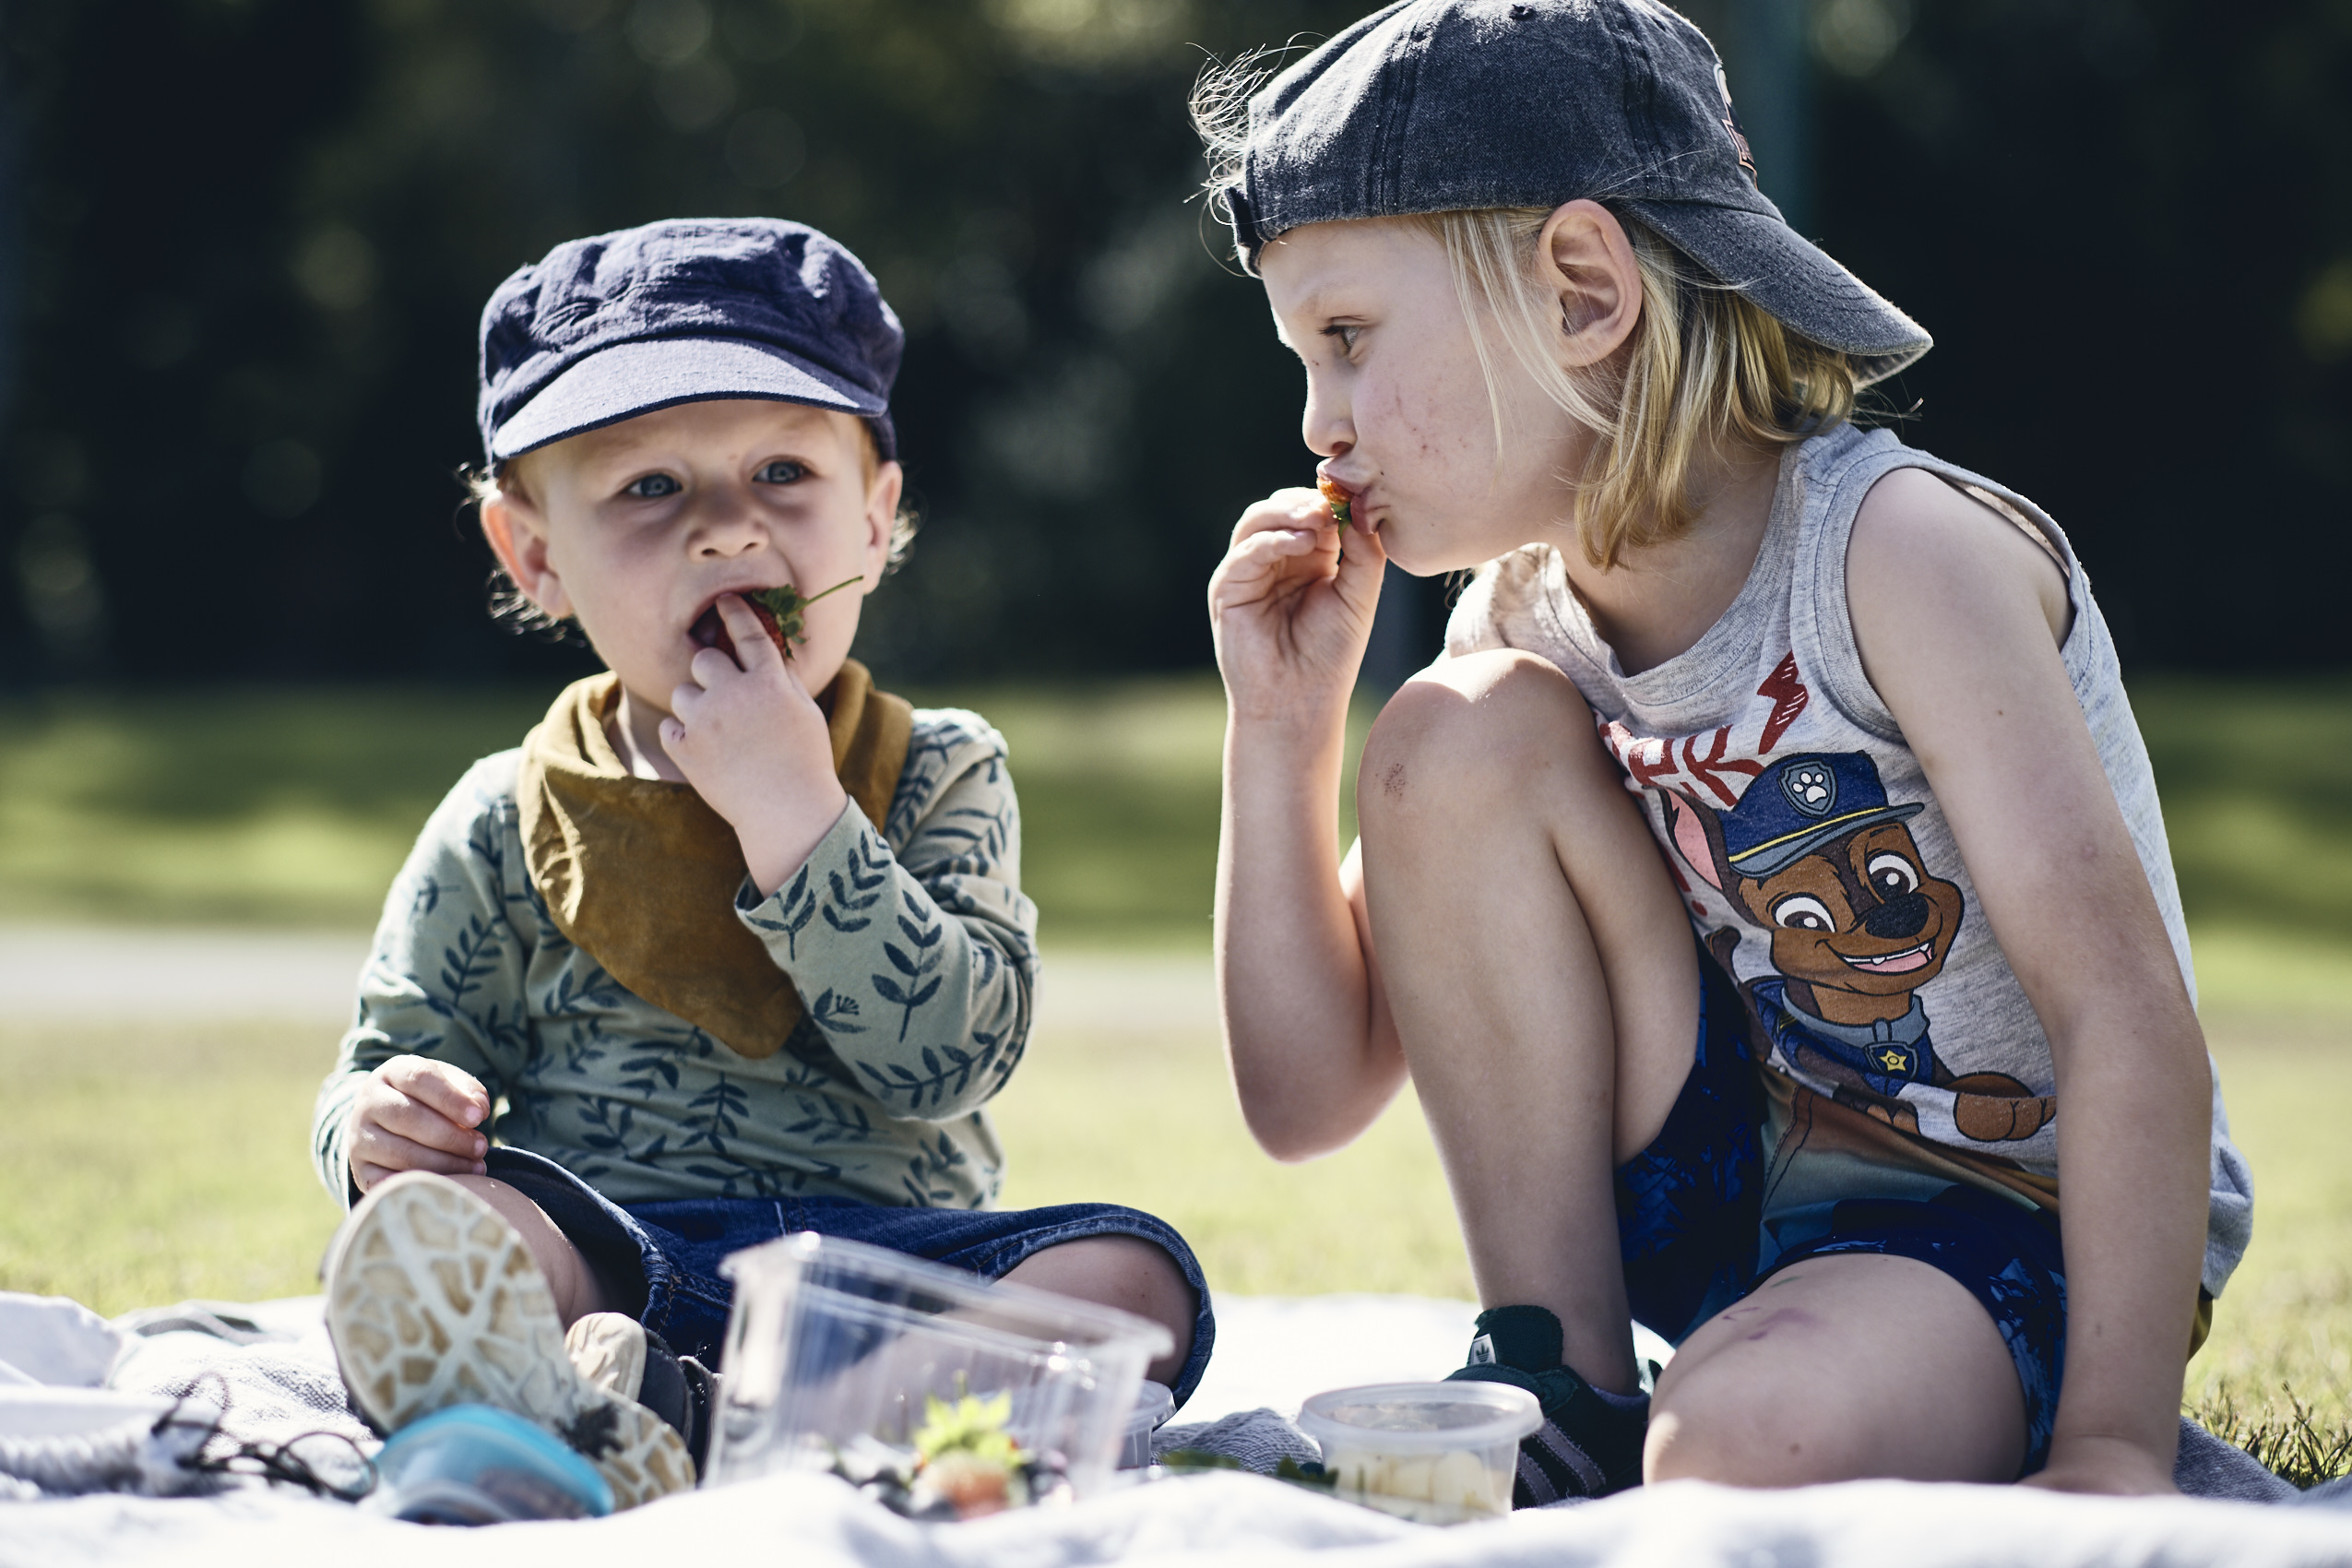 Lockdown • Little Boys Eating Strawberries at the Park • Lifestyle & Portrait Photography